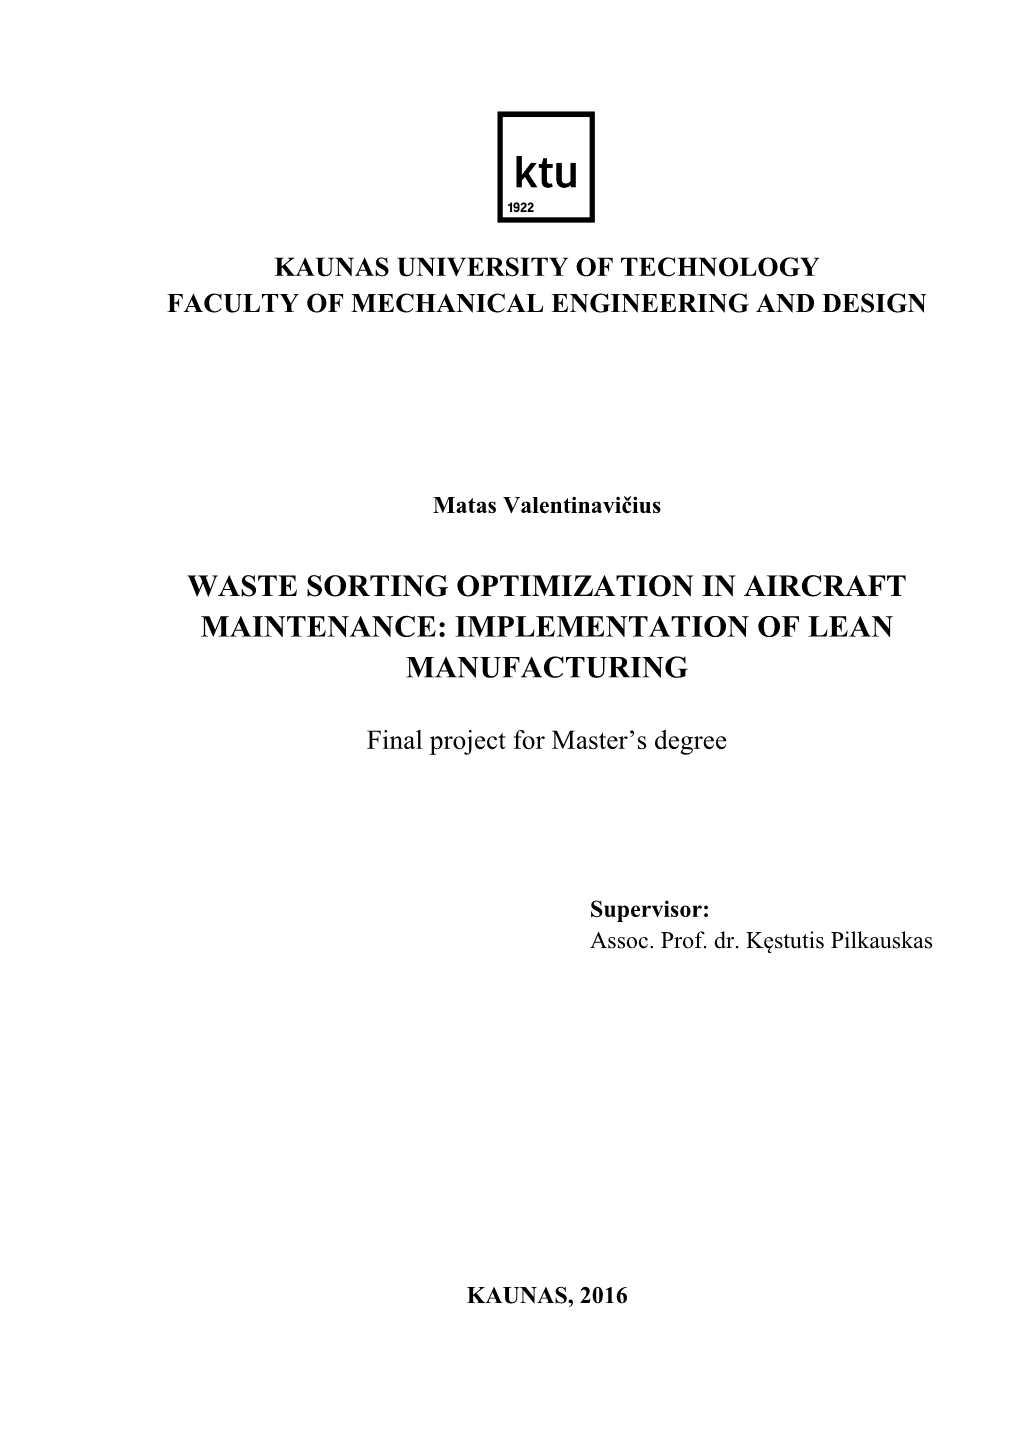 Waste Sorting Optimization in Aircraft Maintenance: Implementation of Lean Manufacturing